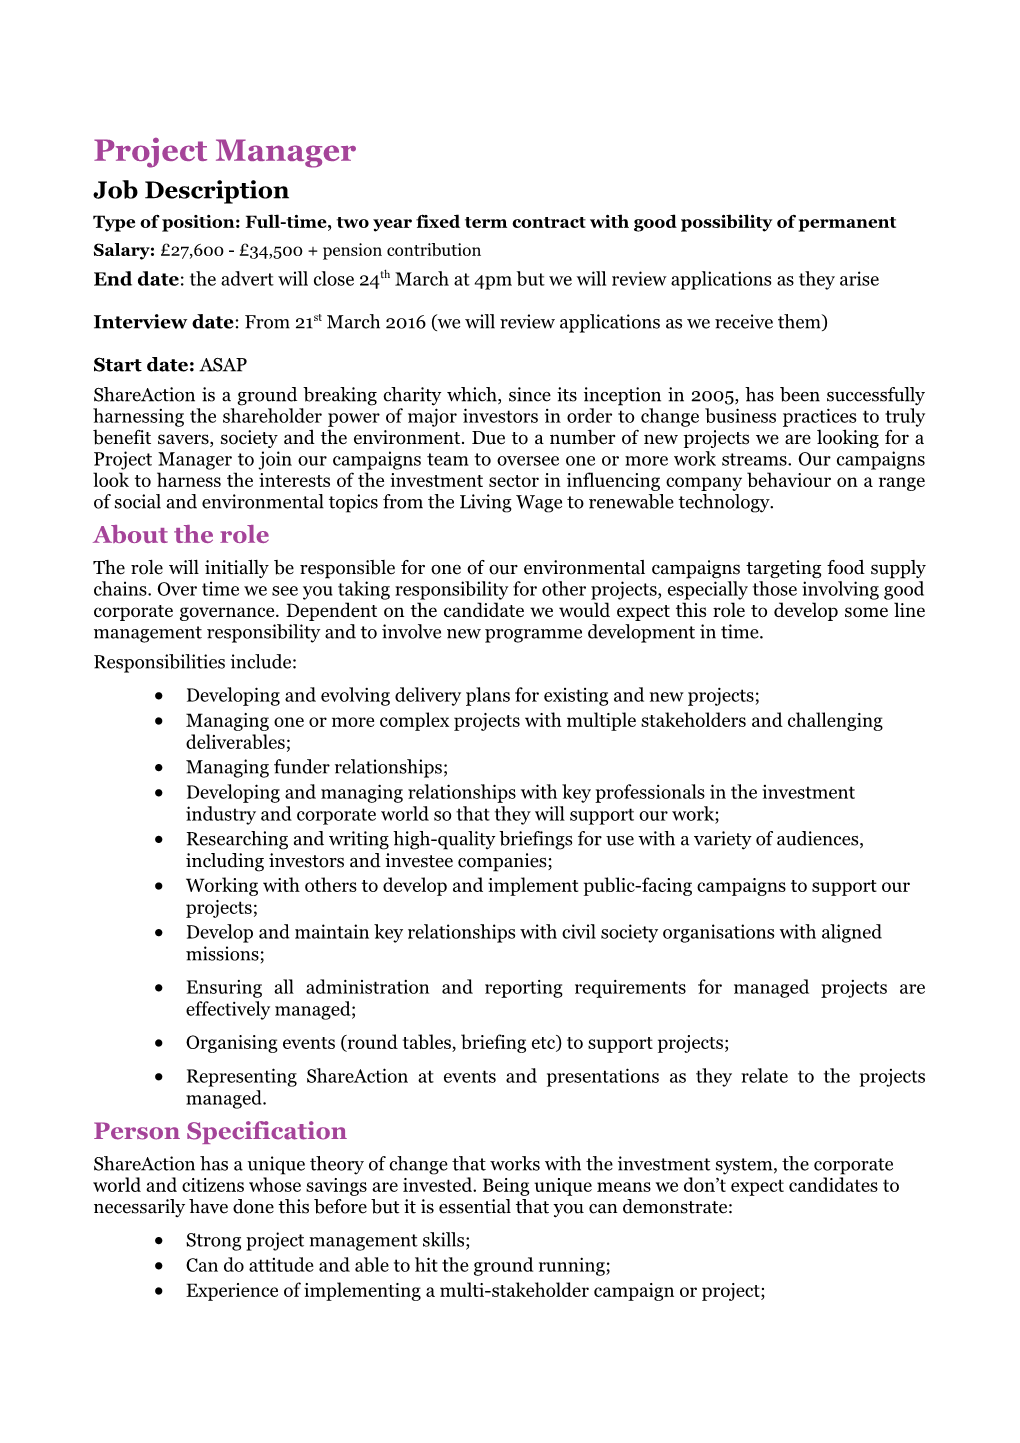 Type of Position: Full-Time, Two Year Fixed Term Contract with Good Possibility of Permanent